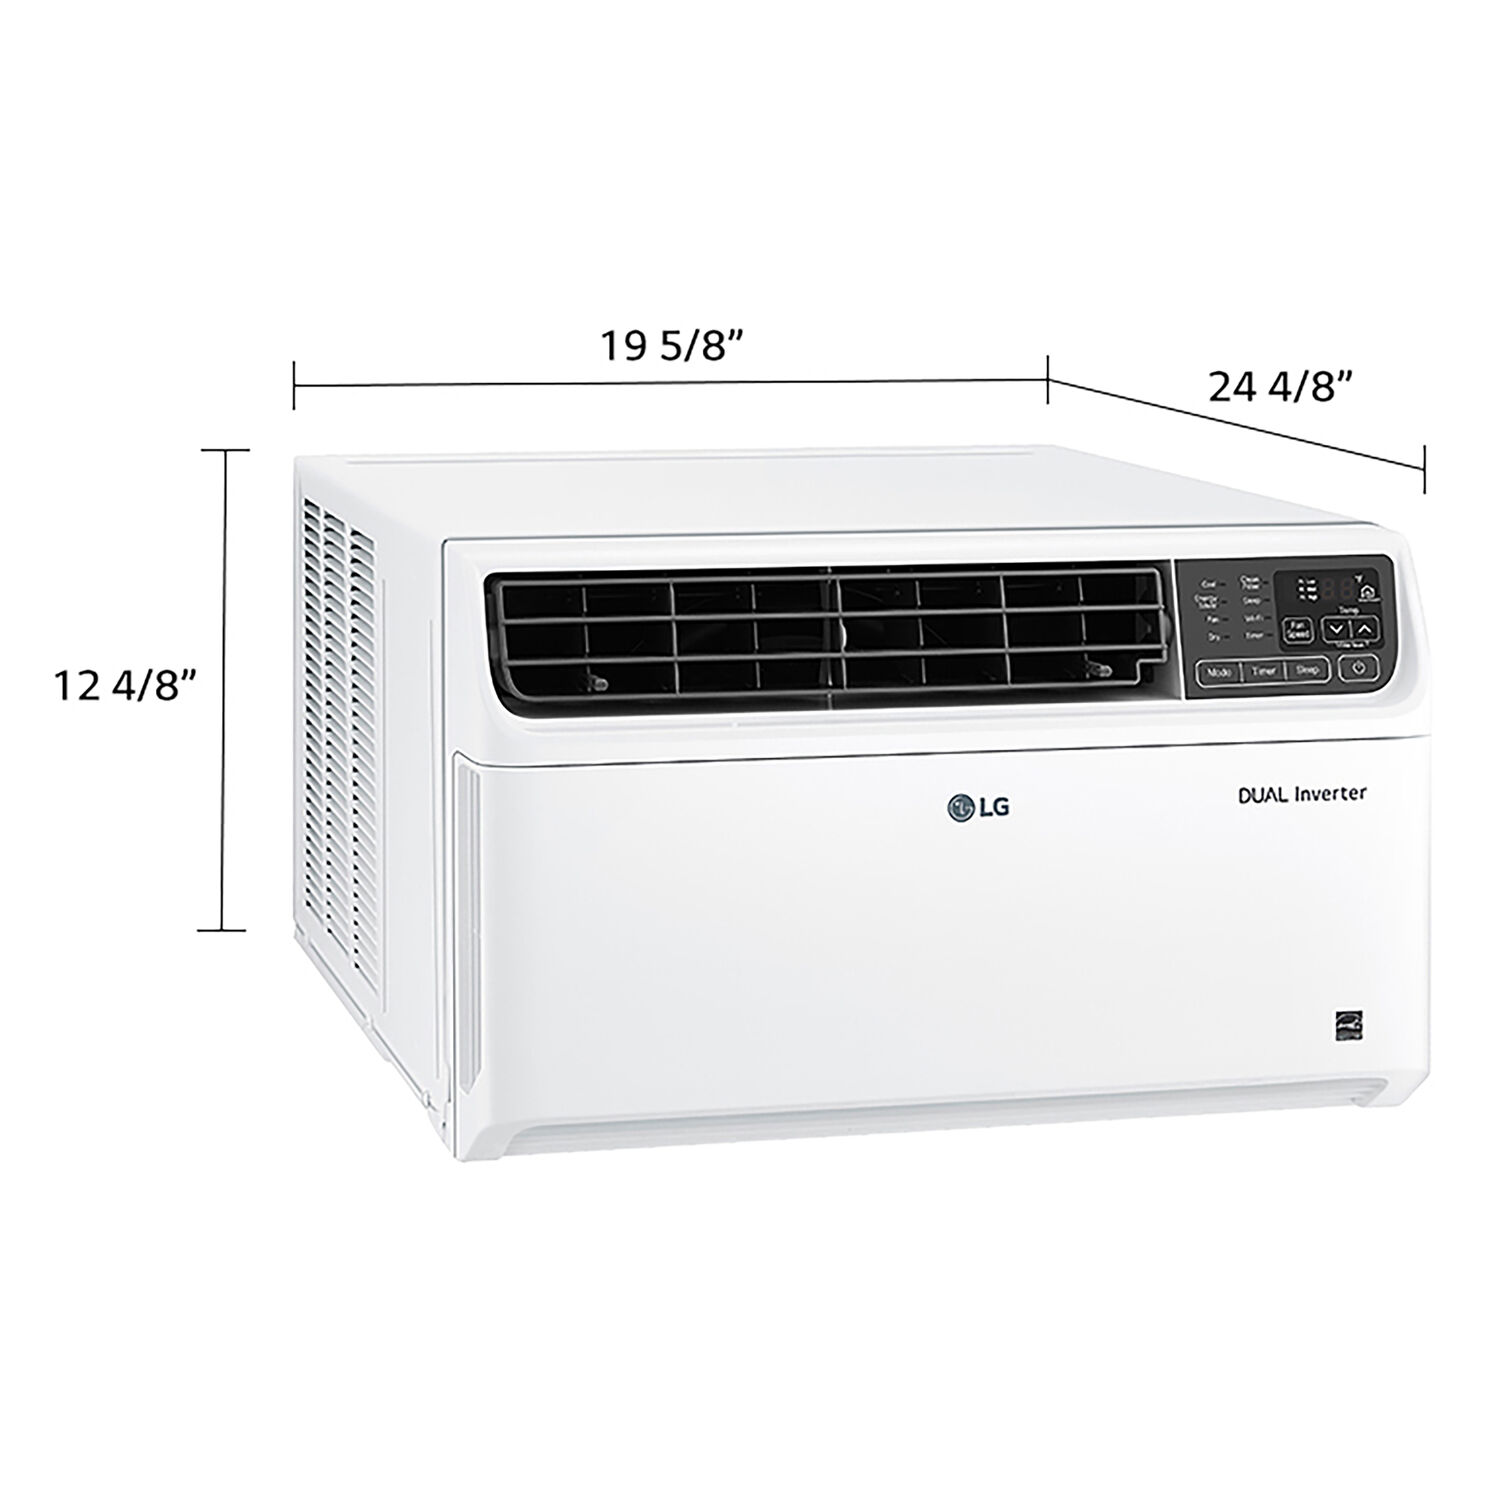 LG 10,000 BTU Dual Inverter Smart Window Air Conditioner, Cools 450 sq ft, Works with Amazon Alexa - image 4 of 9